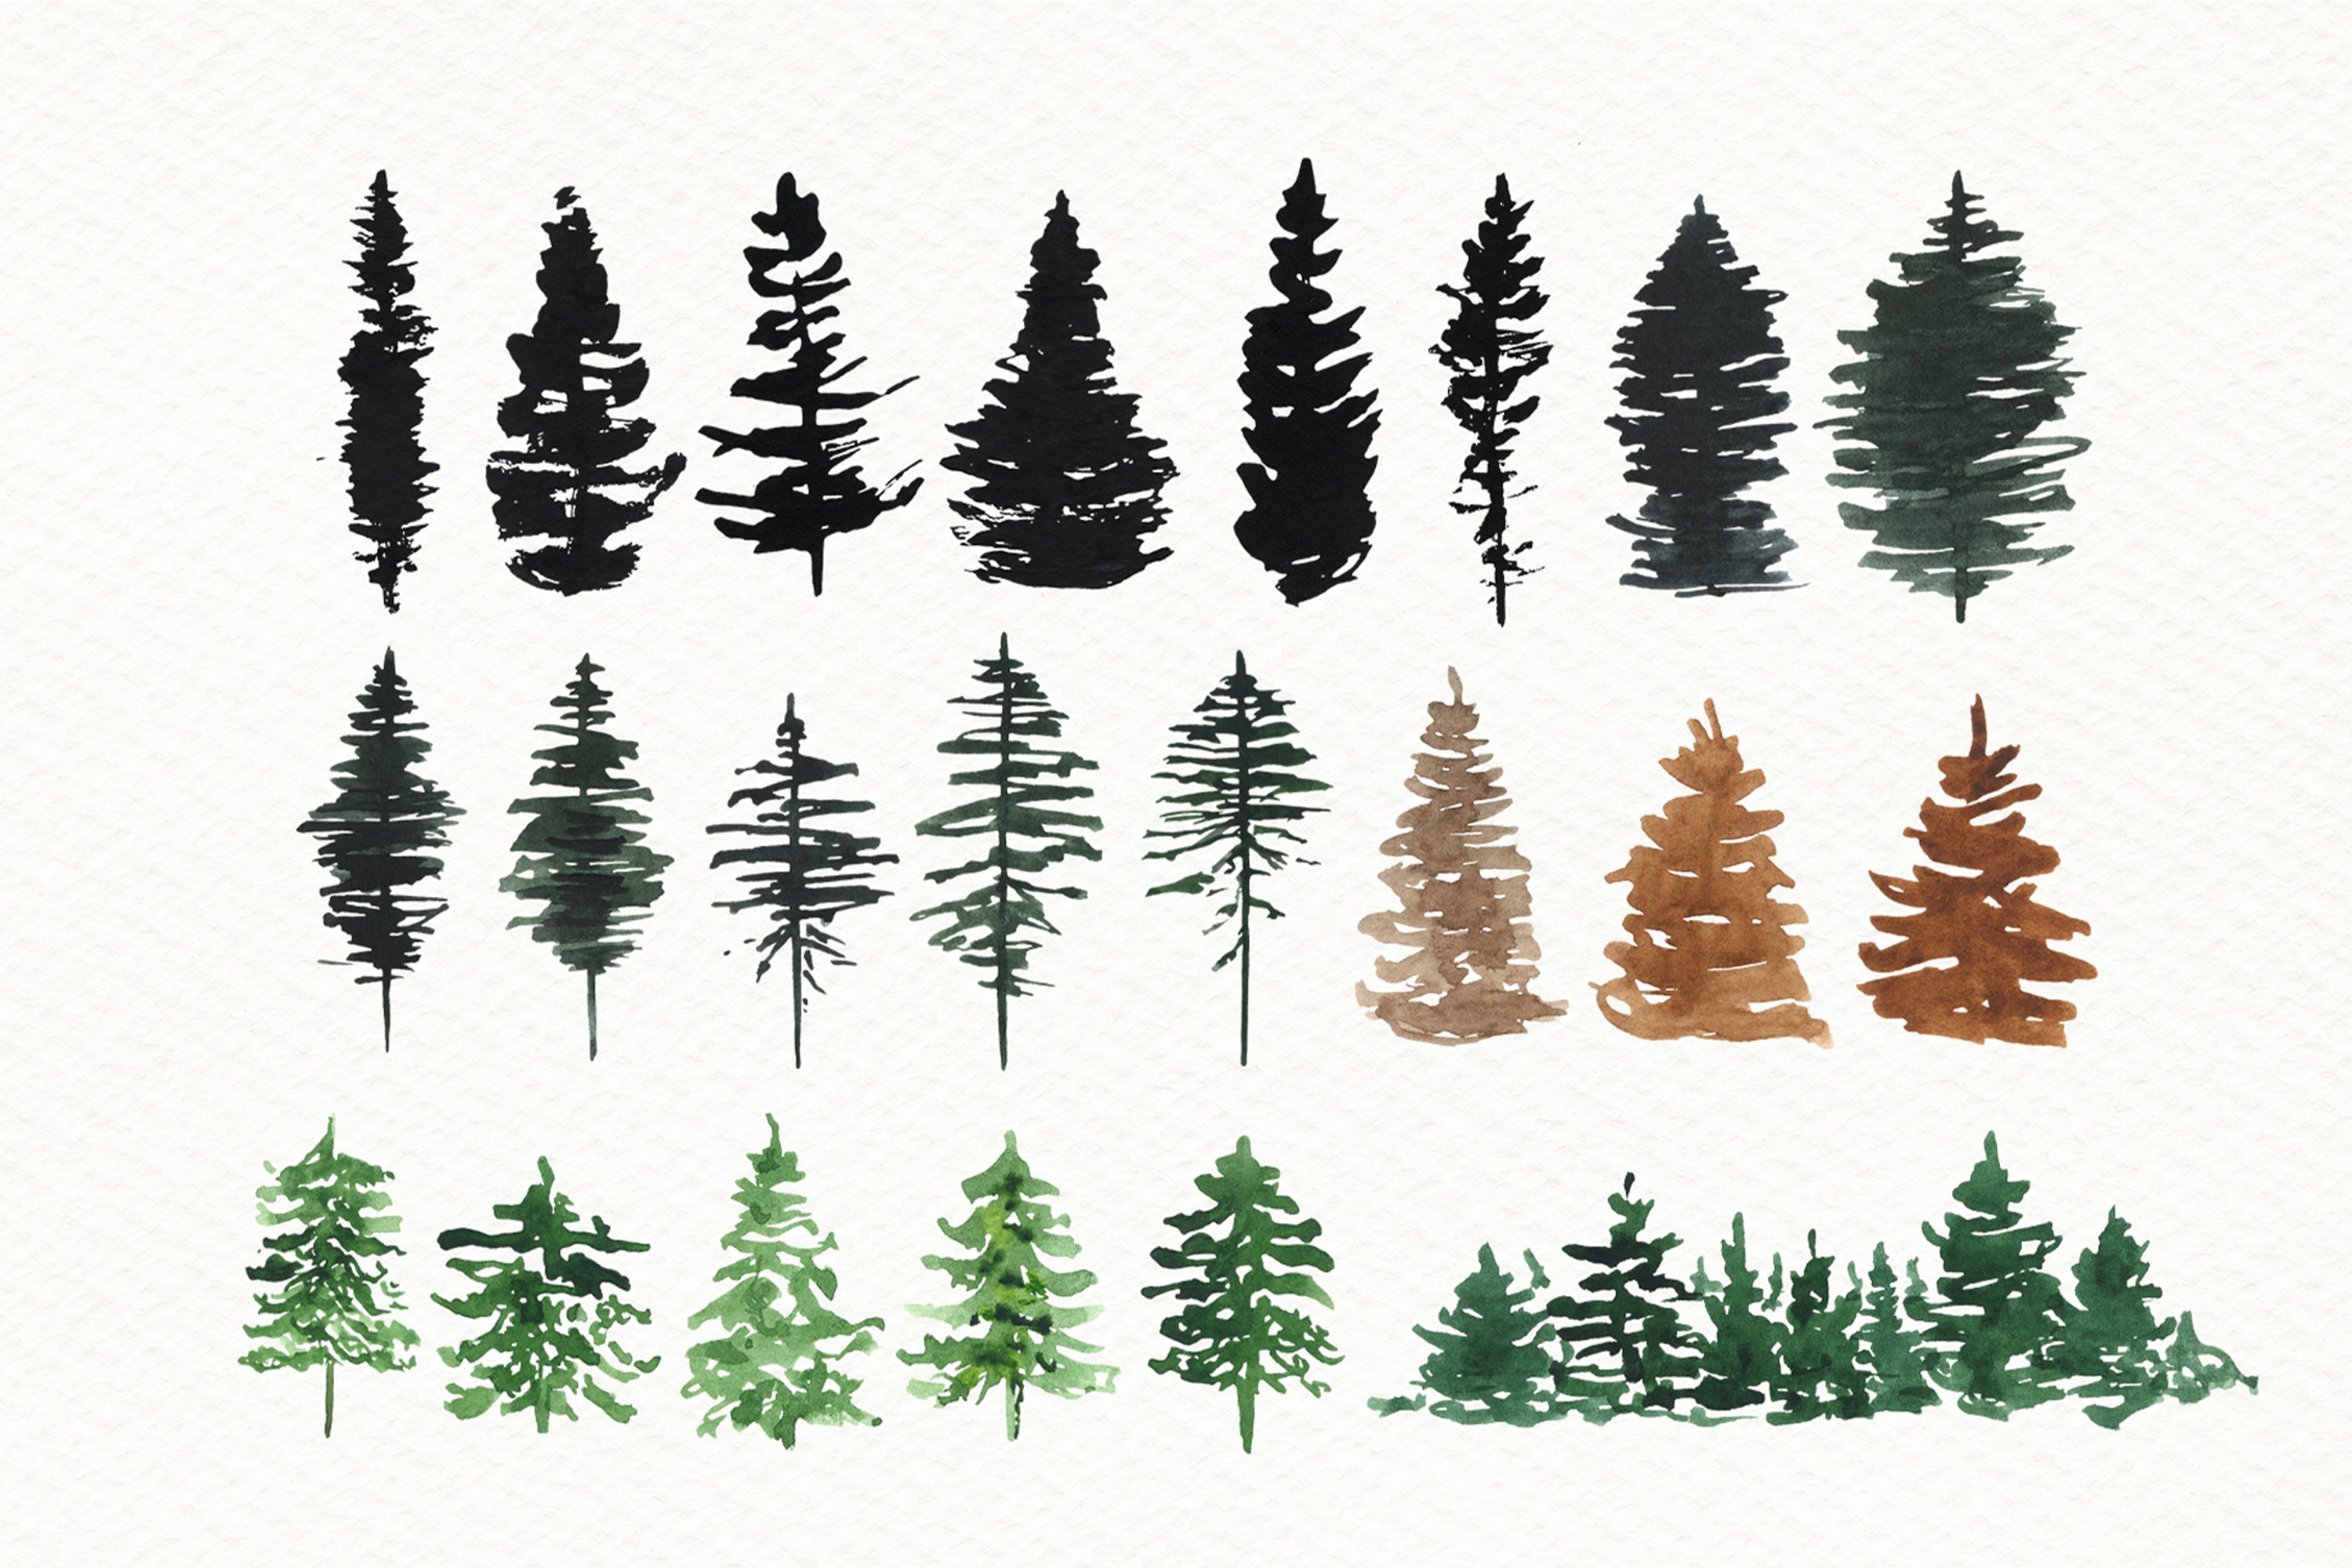 Different trees to choose from.